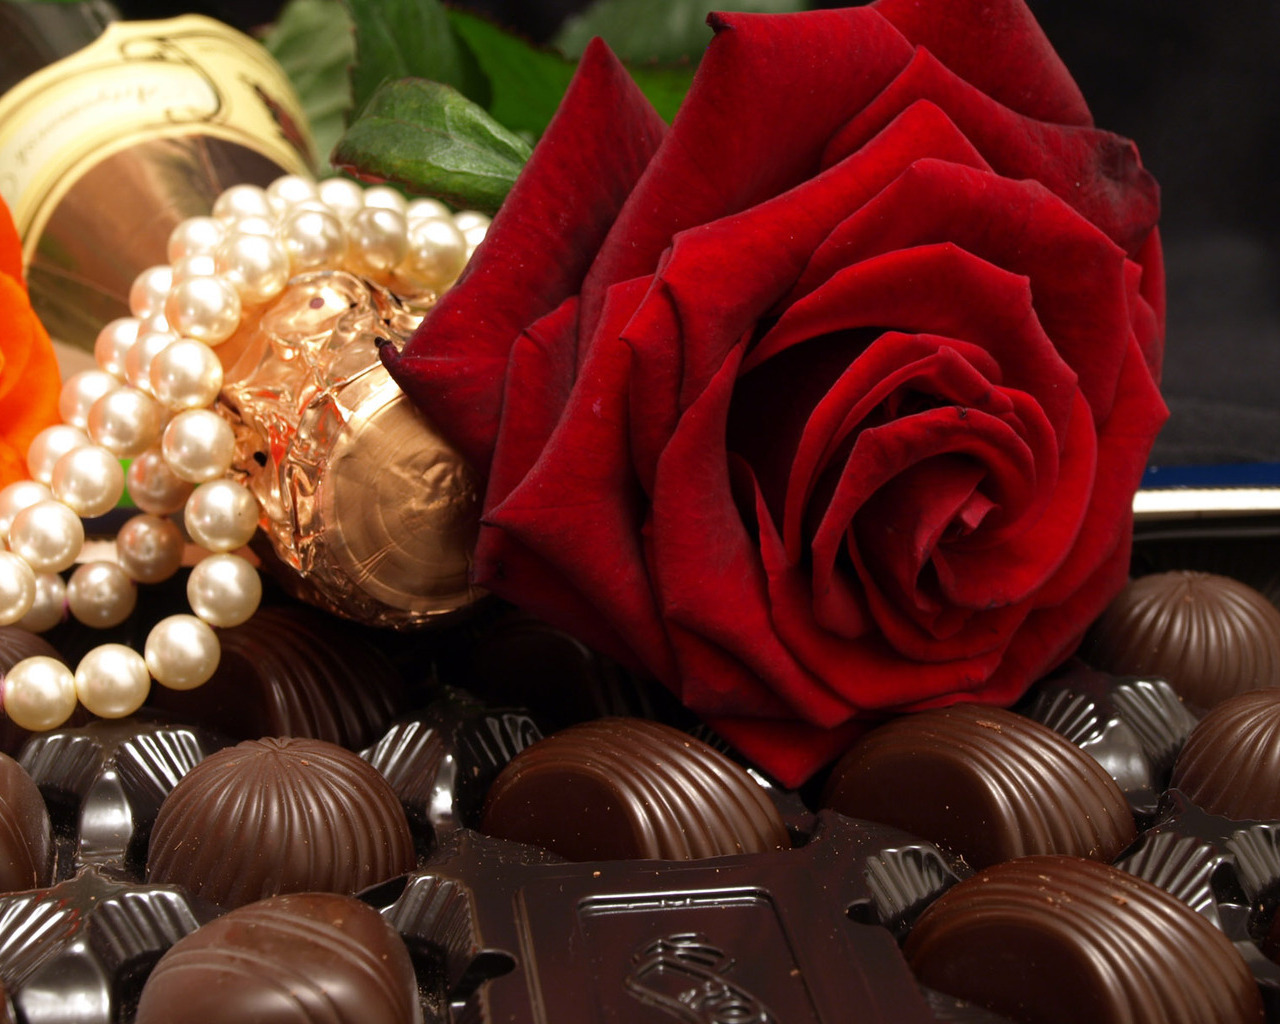 roses, holidays, flowers, food, candies phone background